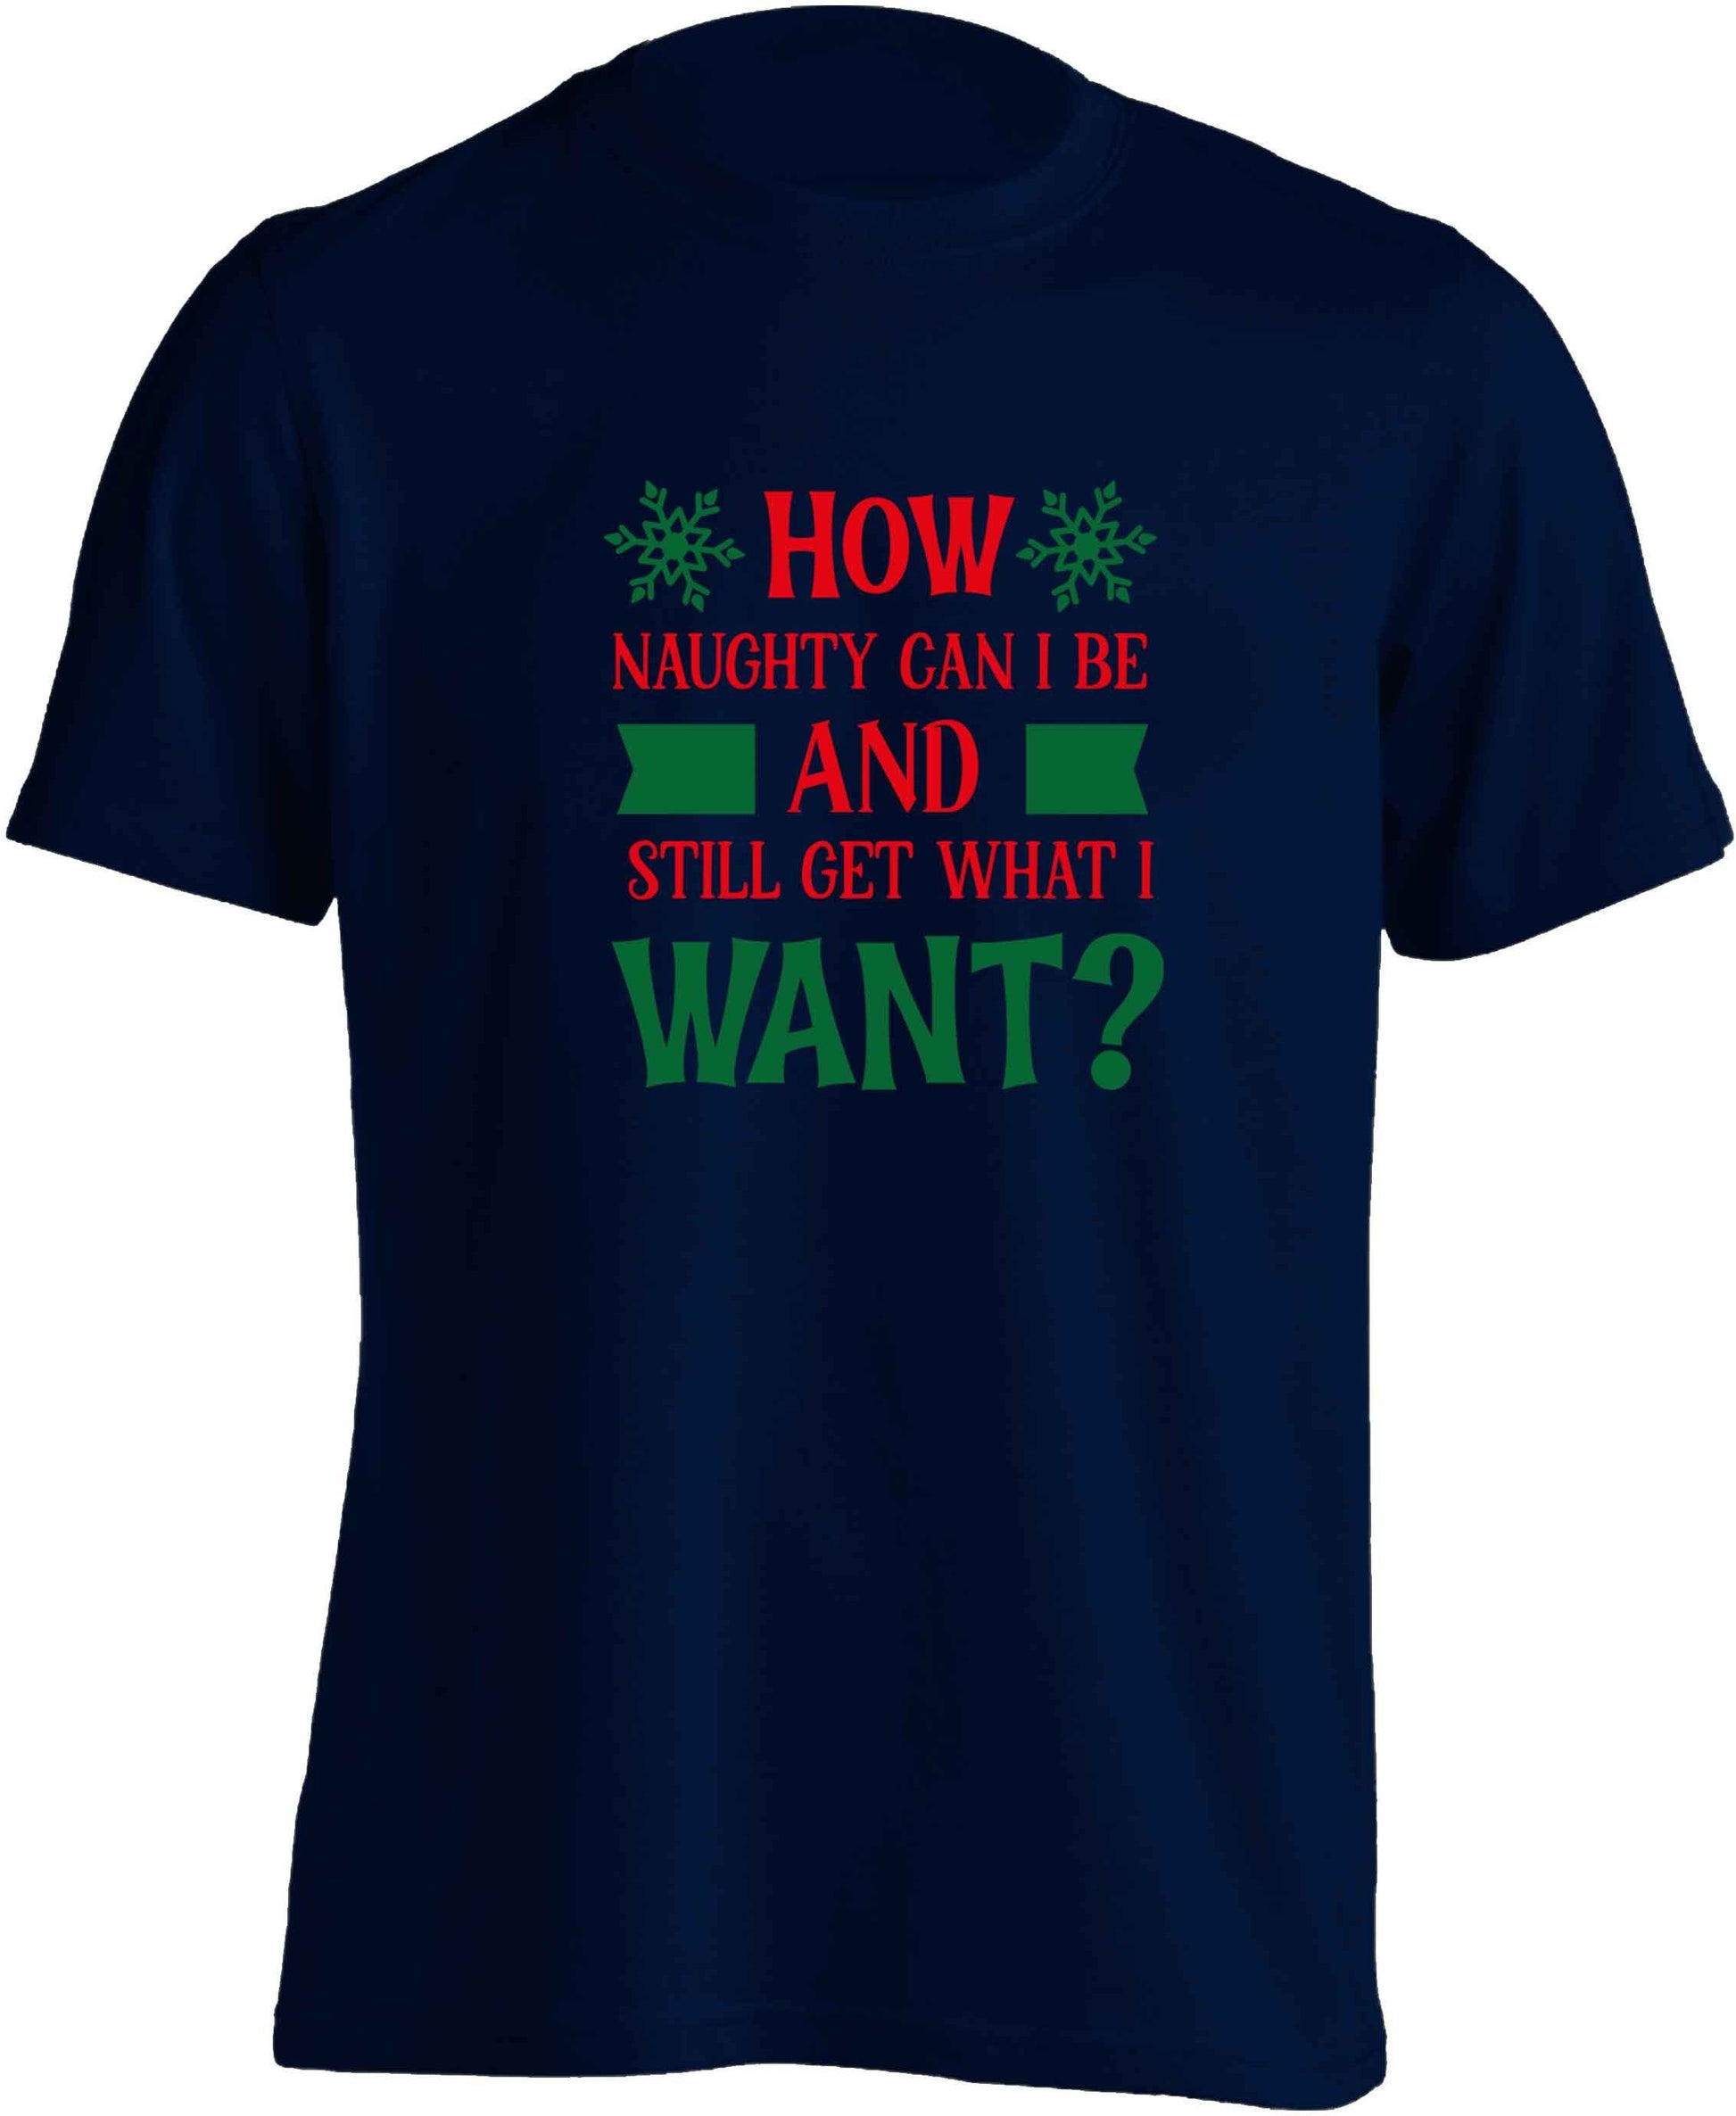 How naughty can I be and still get what I want? adults unisex navy Tshirt 2XL